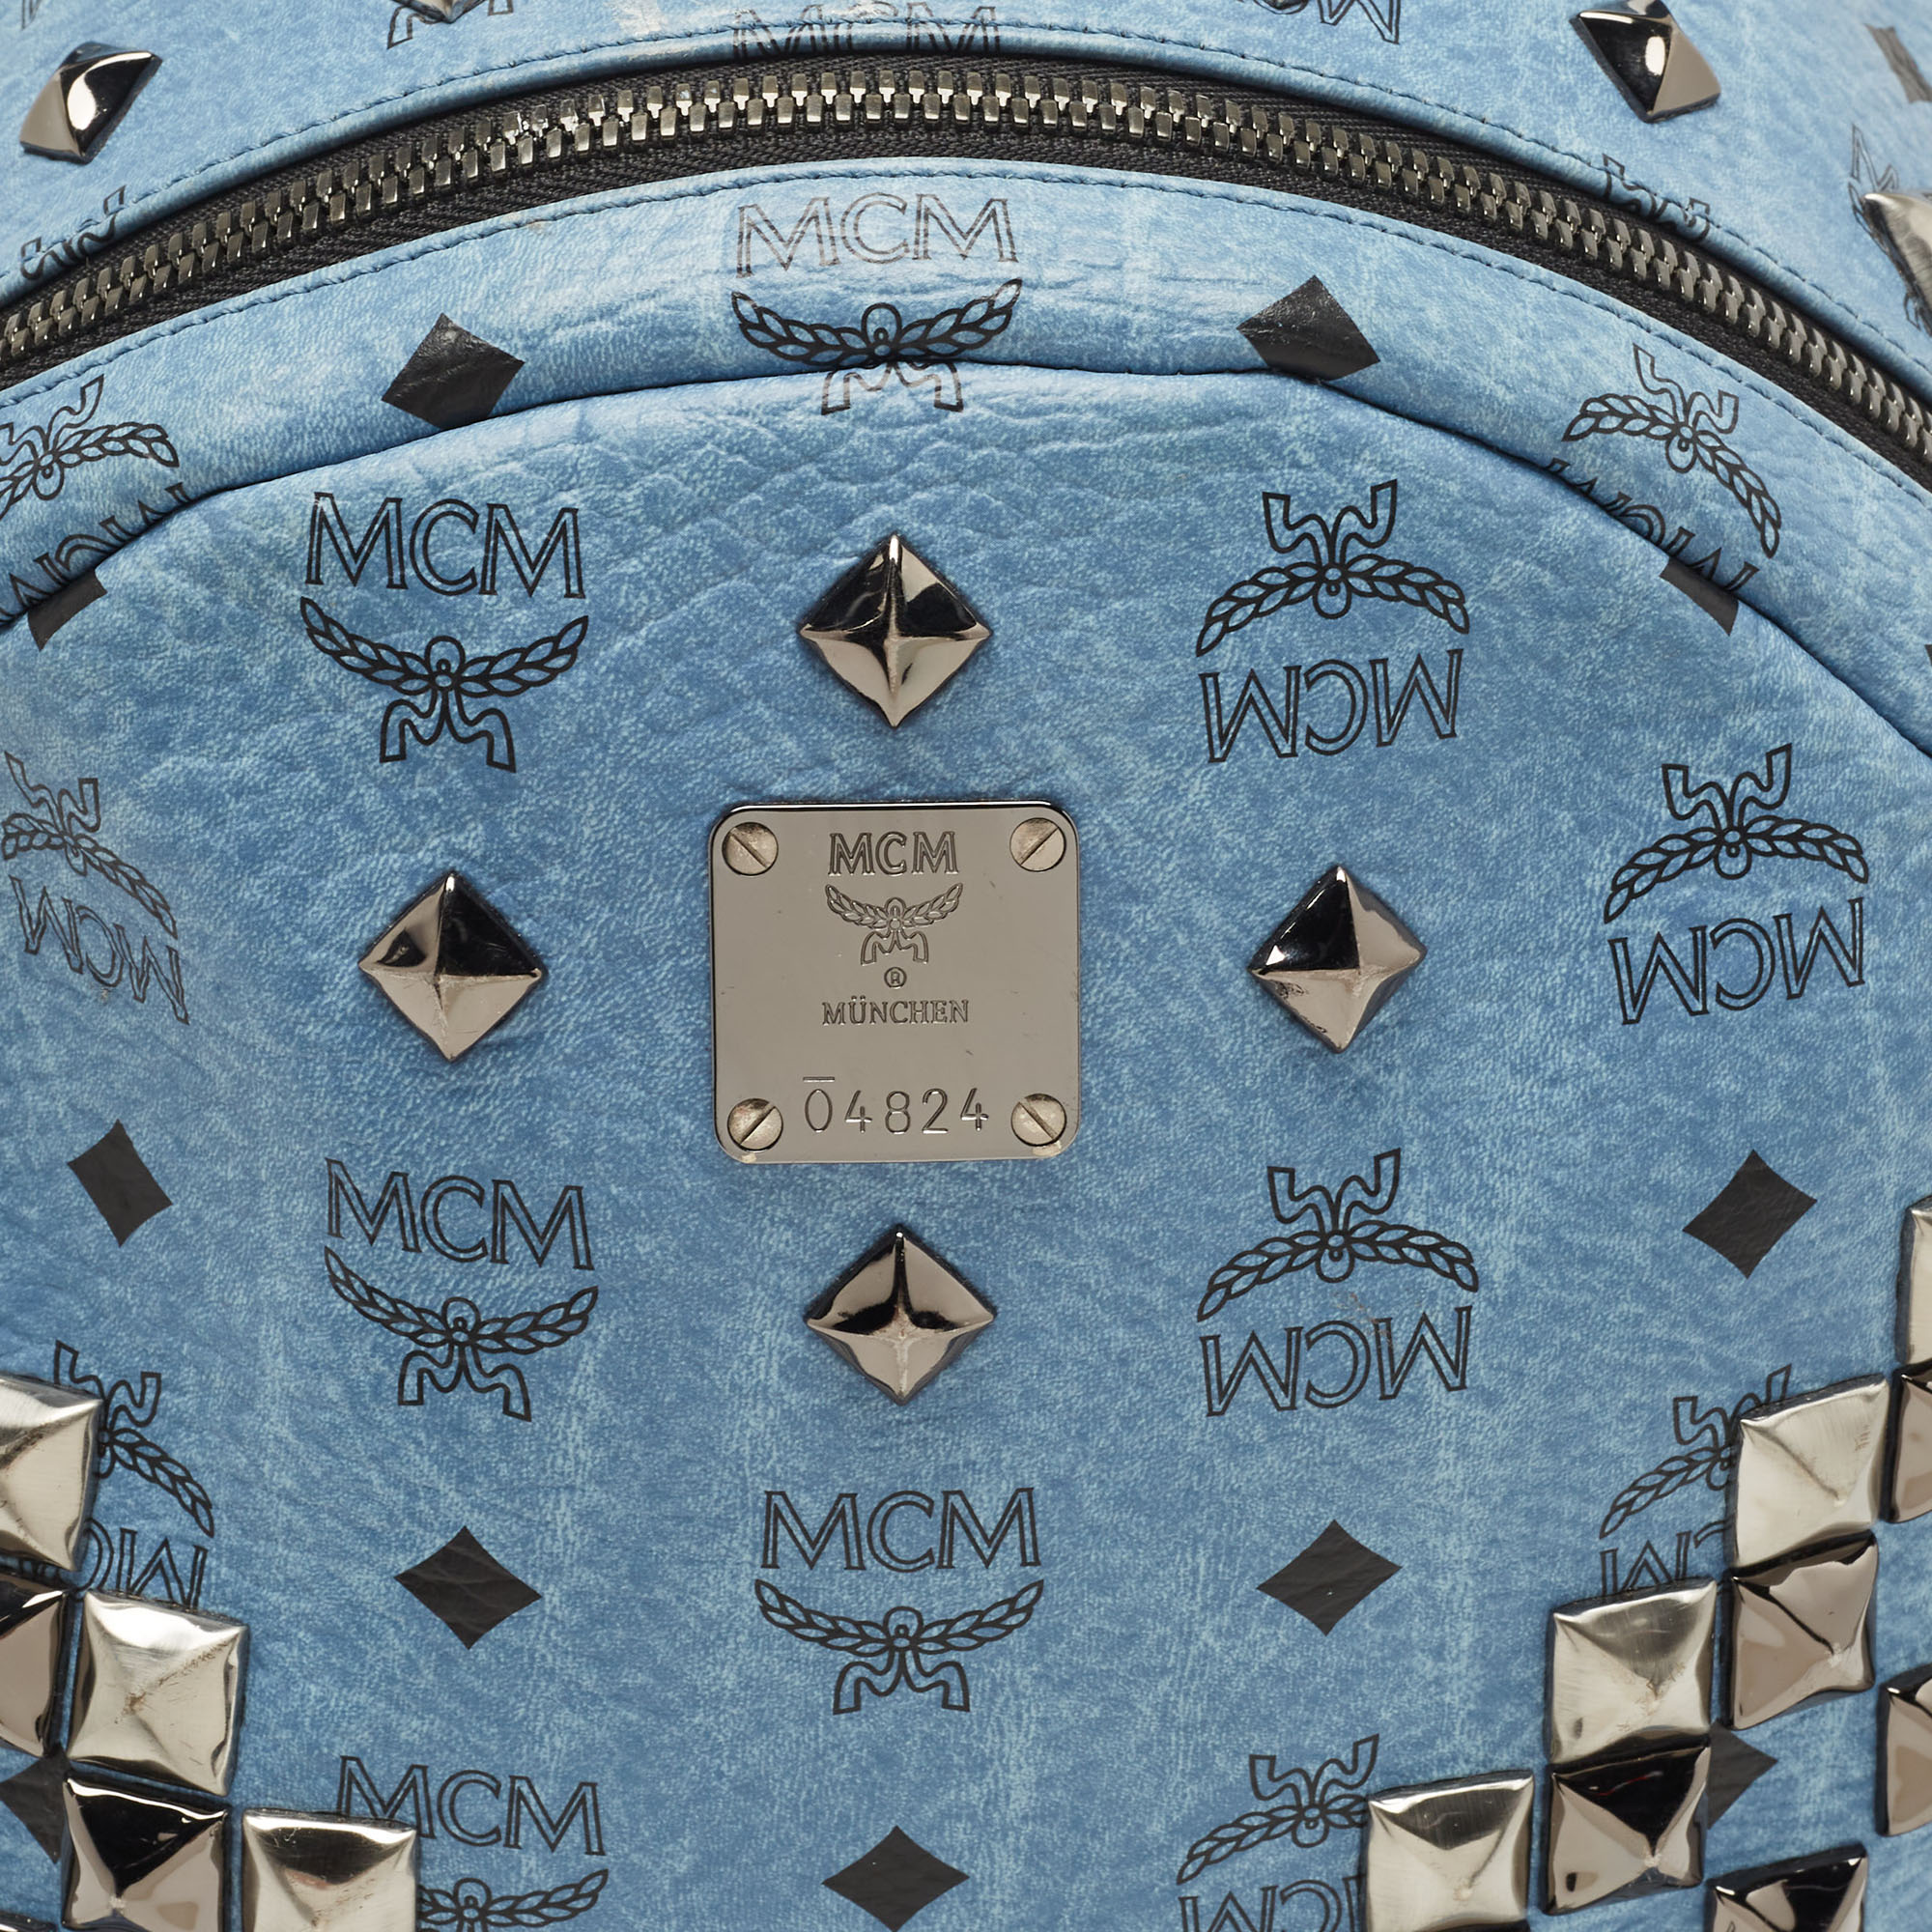 MCM Light Blue Visetos Coated Canvas And Leather Studs Backpack